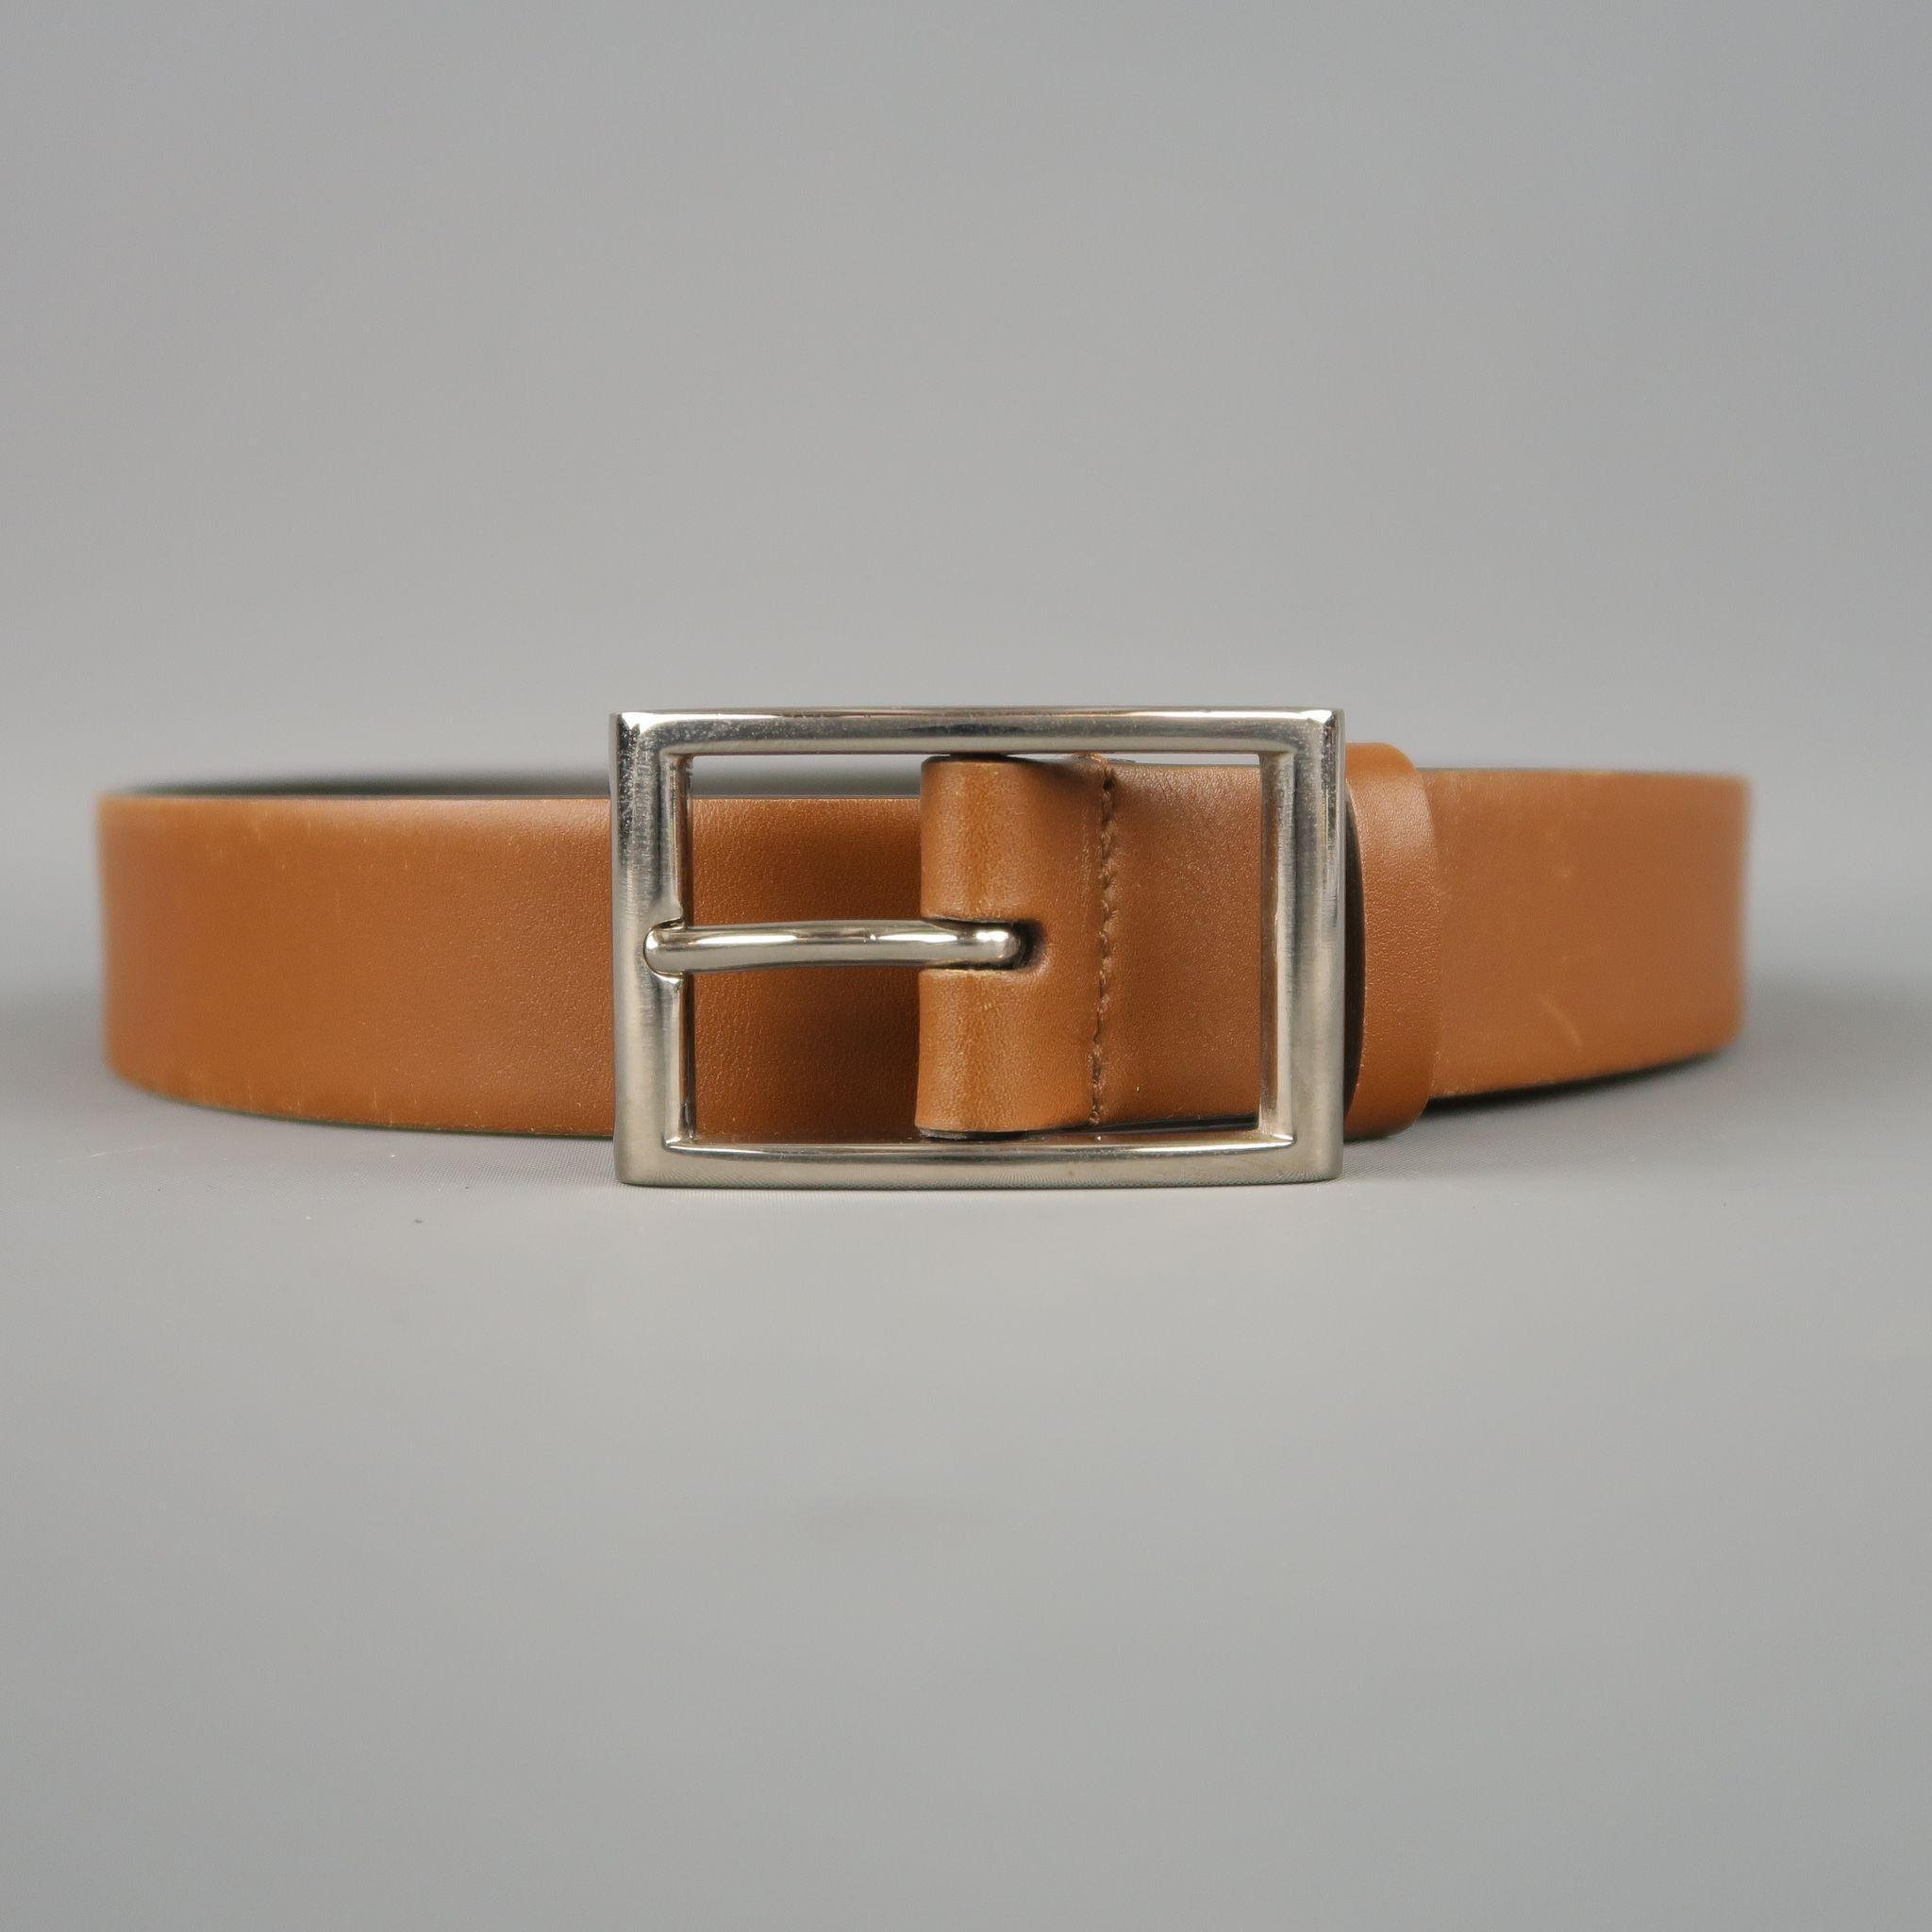 PRADA dress belt features a tan brown leather strap with a  silver tone metal rectangular buckle. Minor wear. Made in Italy.

Good Pre-Owned Condition.
Marked: 75 / 30

Length: 35.5 in.
Width: 1 in.
Fits: 27-31 in.